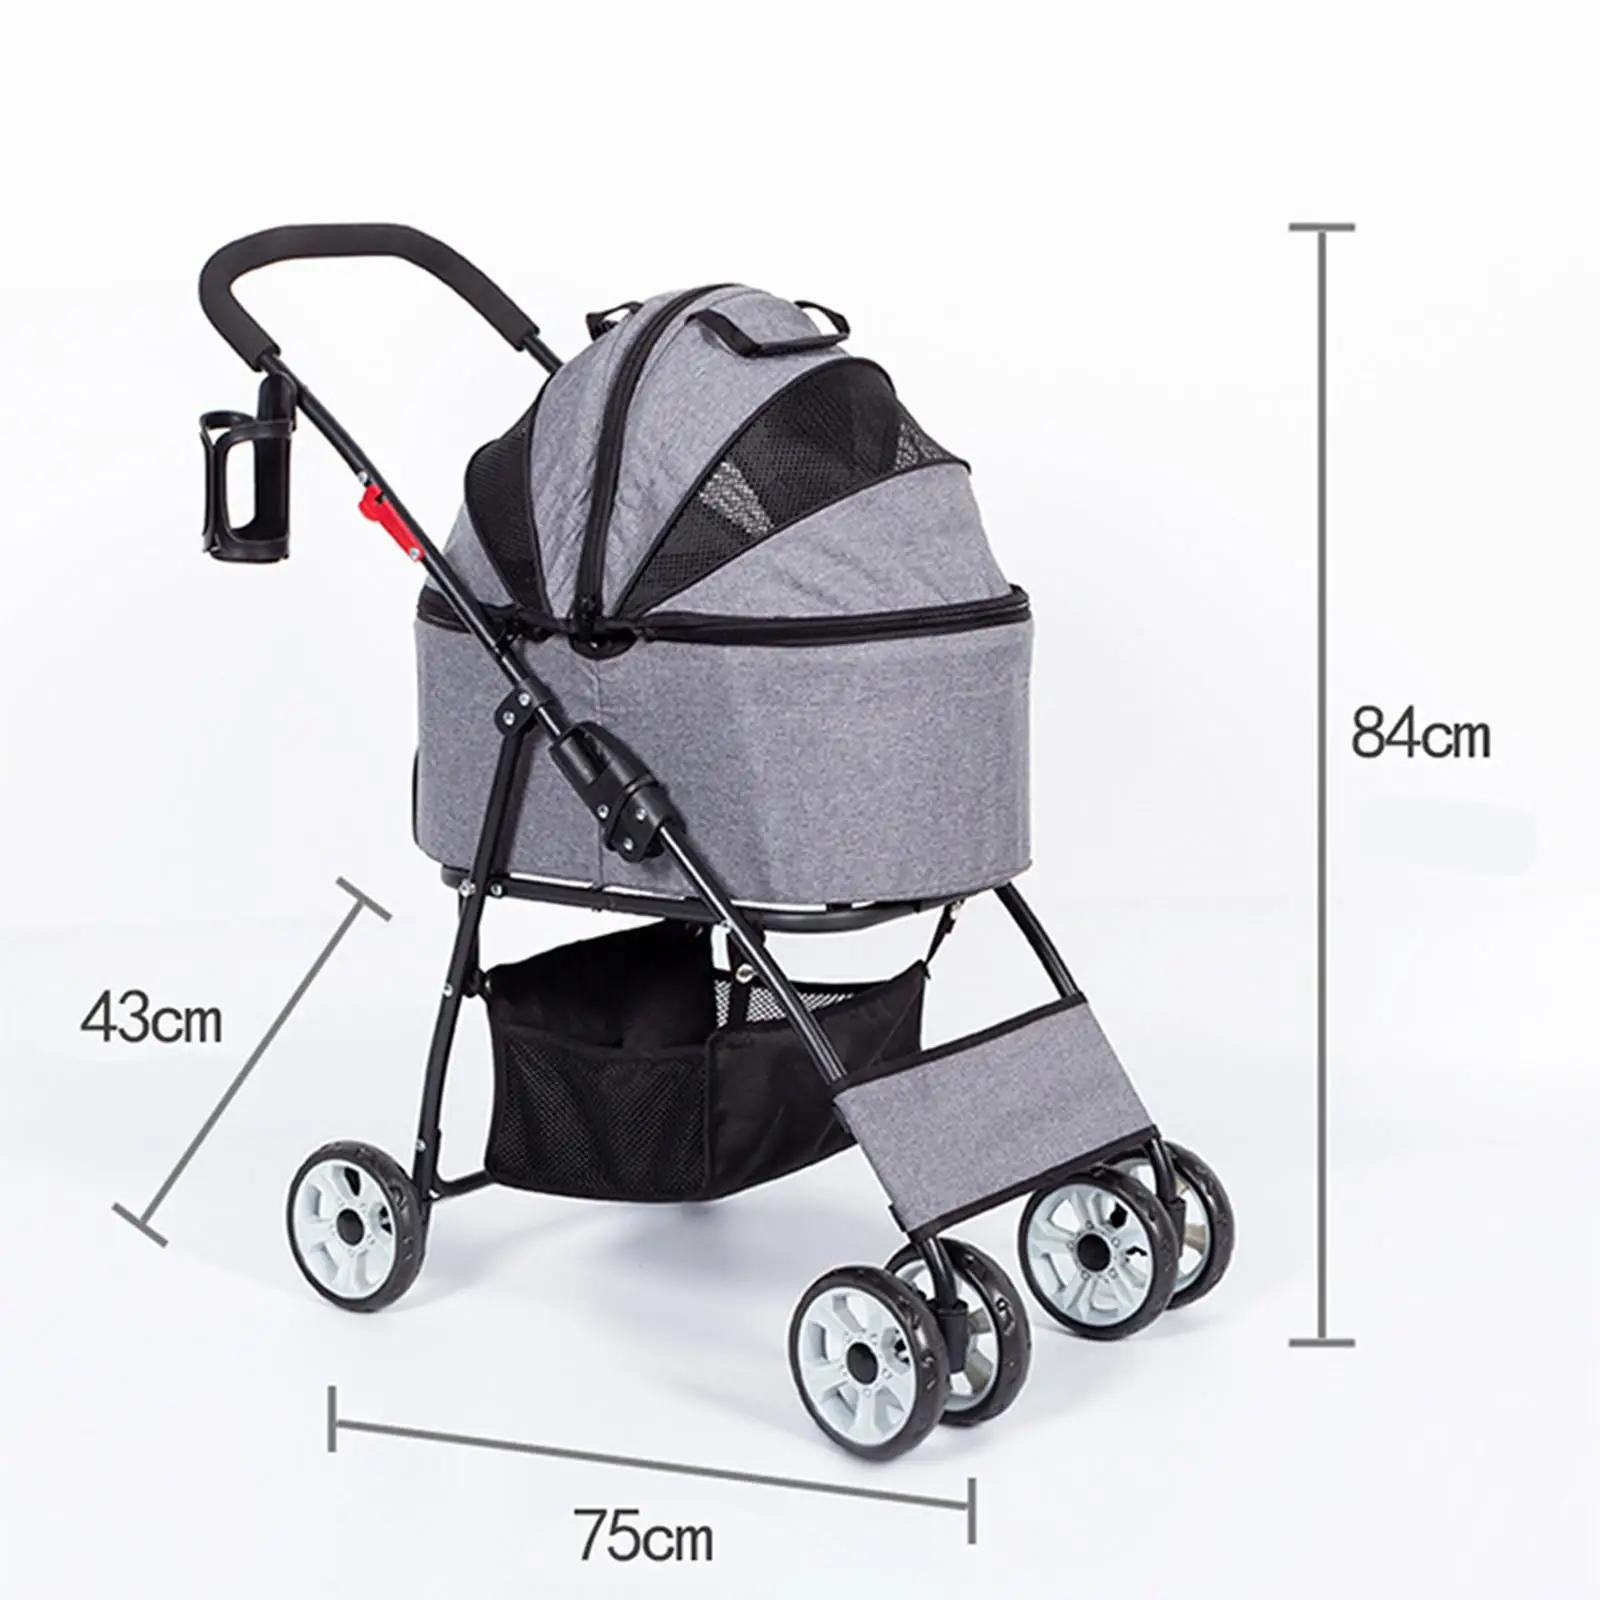 Dog Stroller Ventilation Sturdy with Storage Basket Foldable Pet Carriage Detachable Go Out Cart Cat Trolley for Kitty